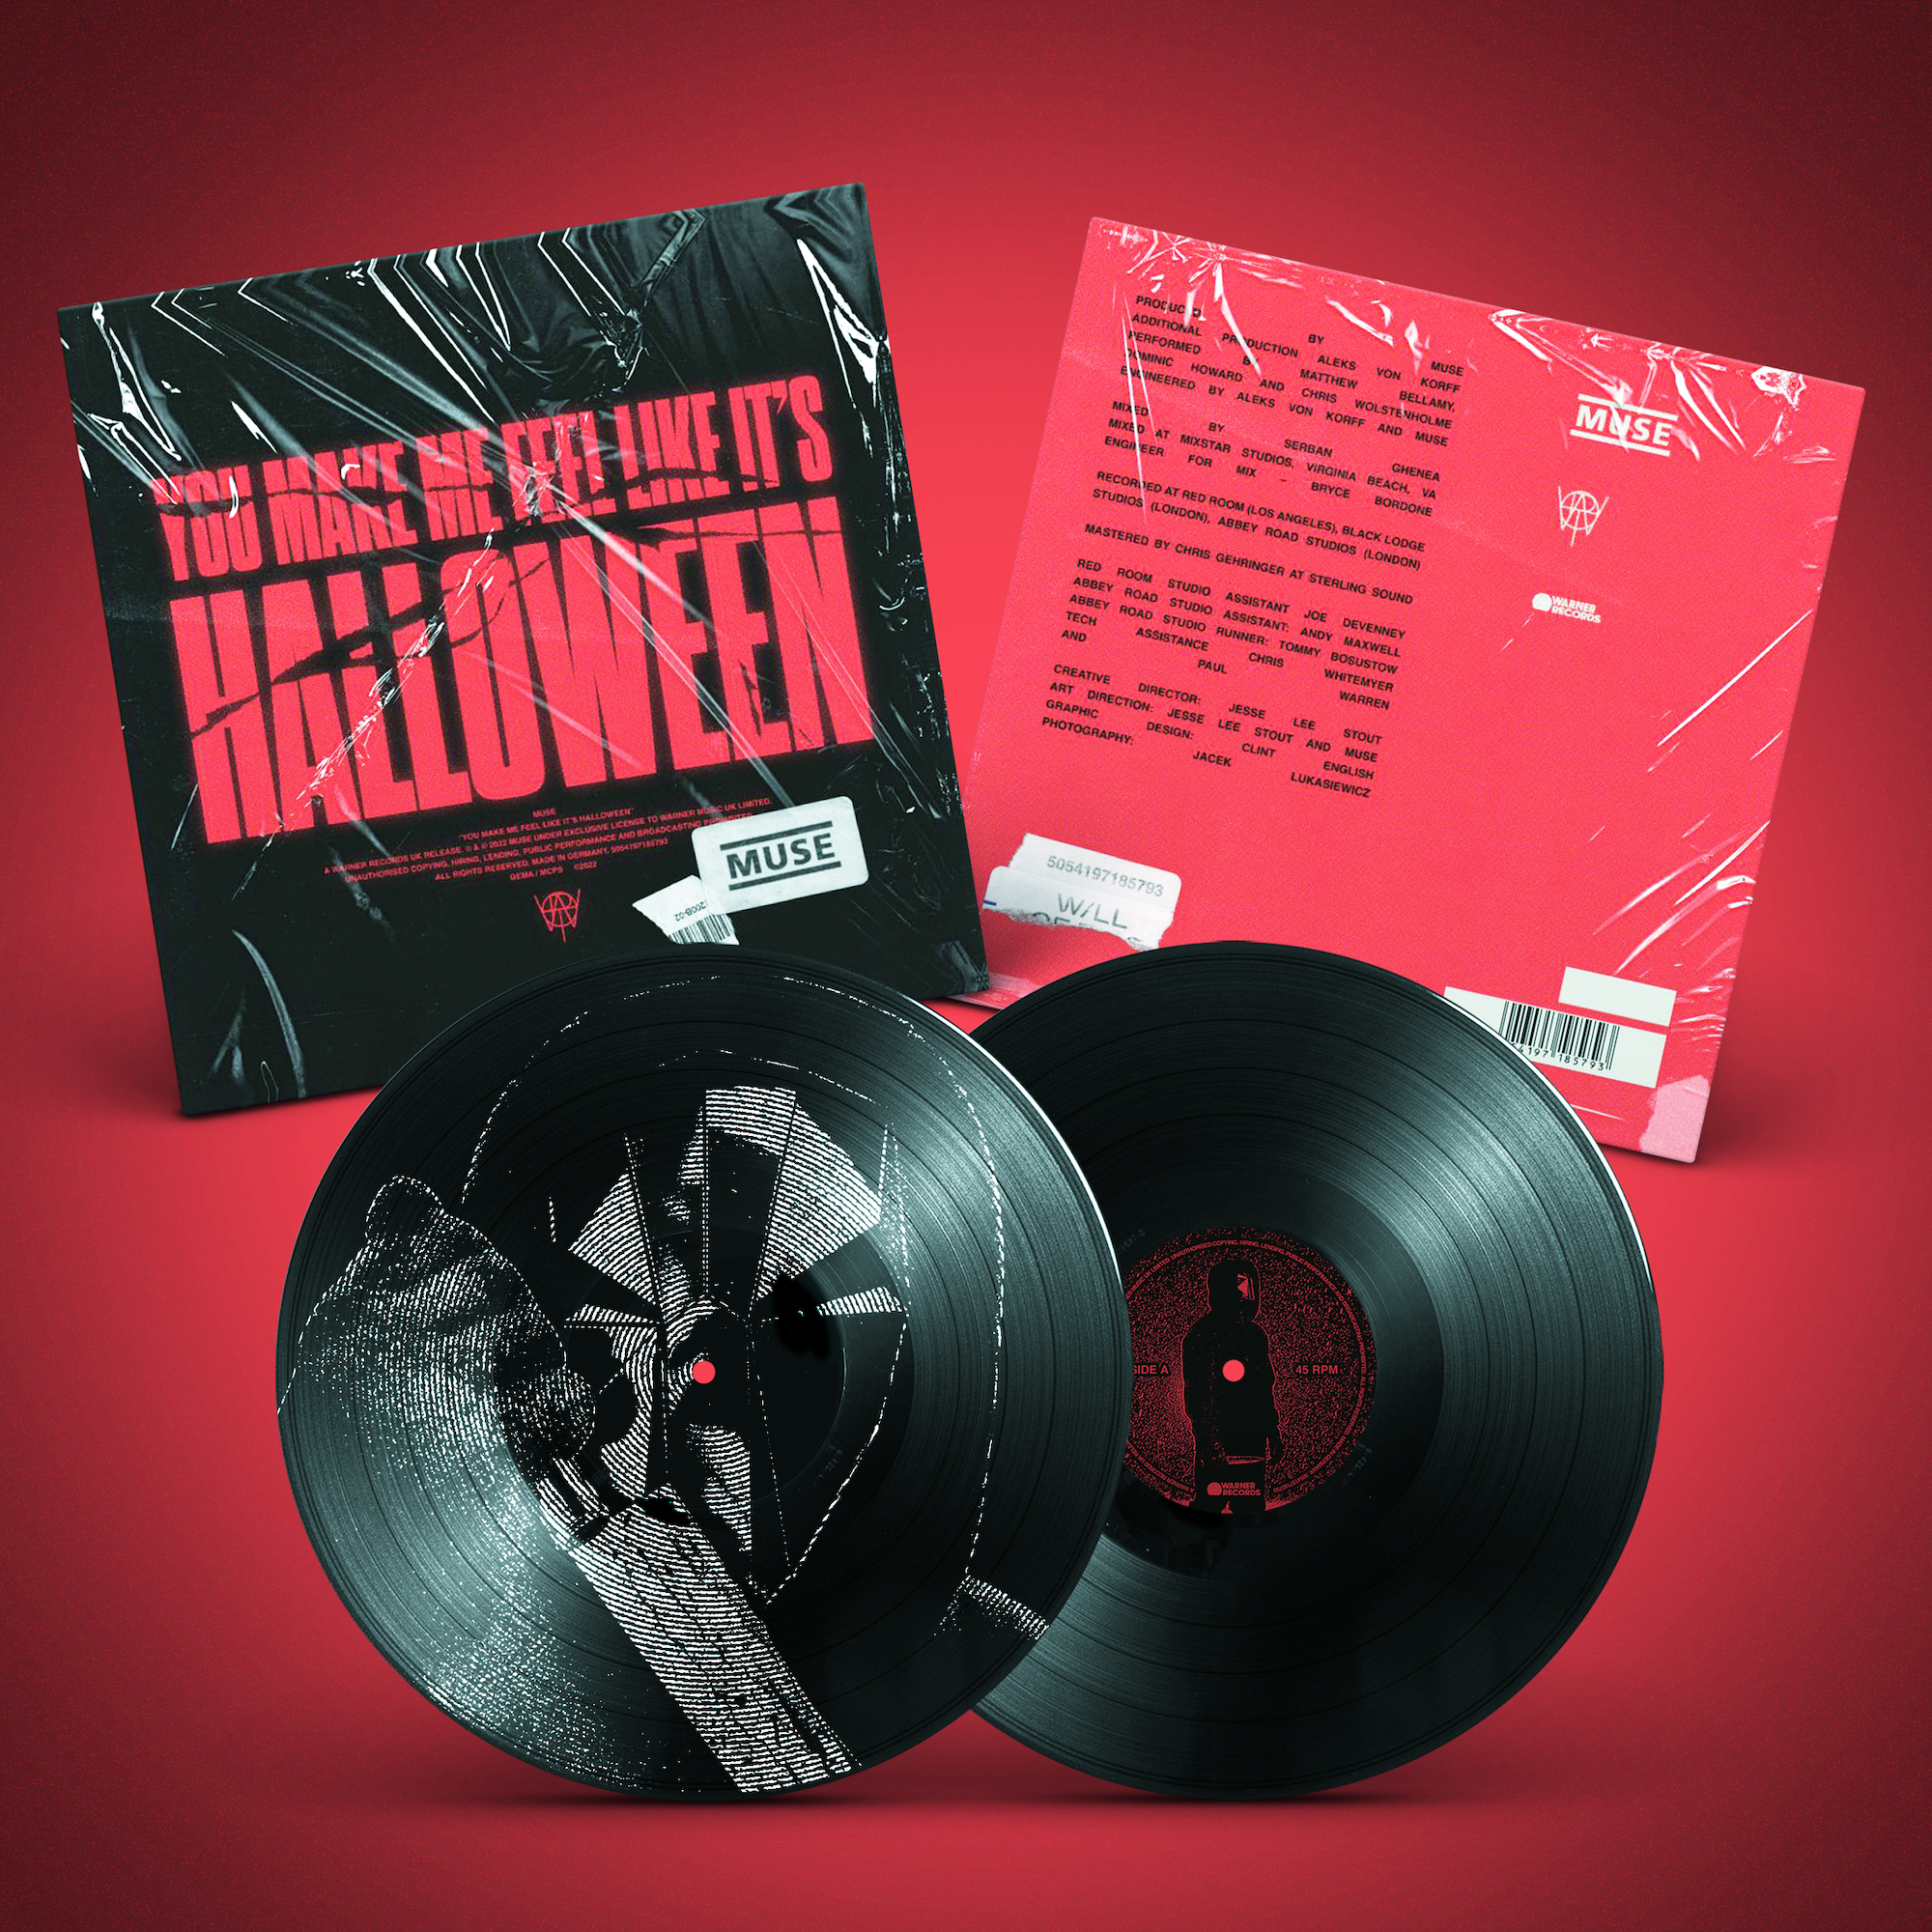 Muse Official Website You Make Me Feel Like It's Halloween: Vinyl